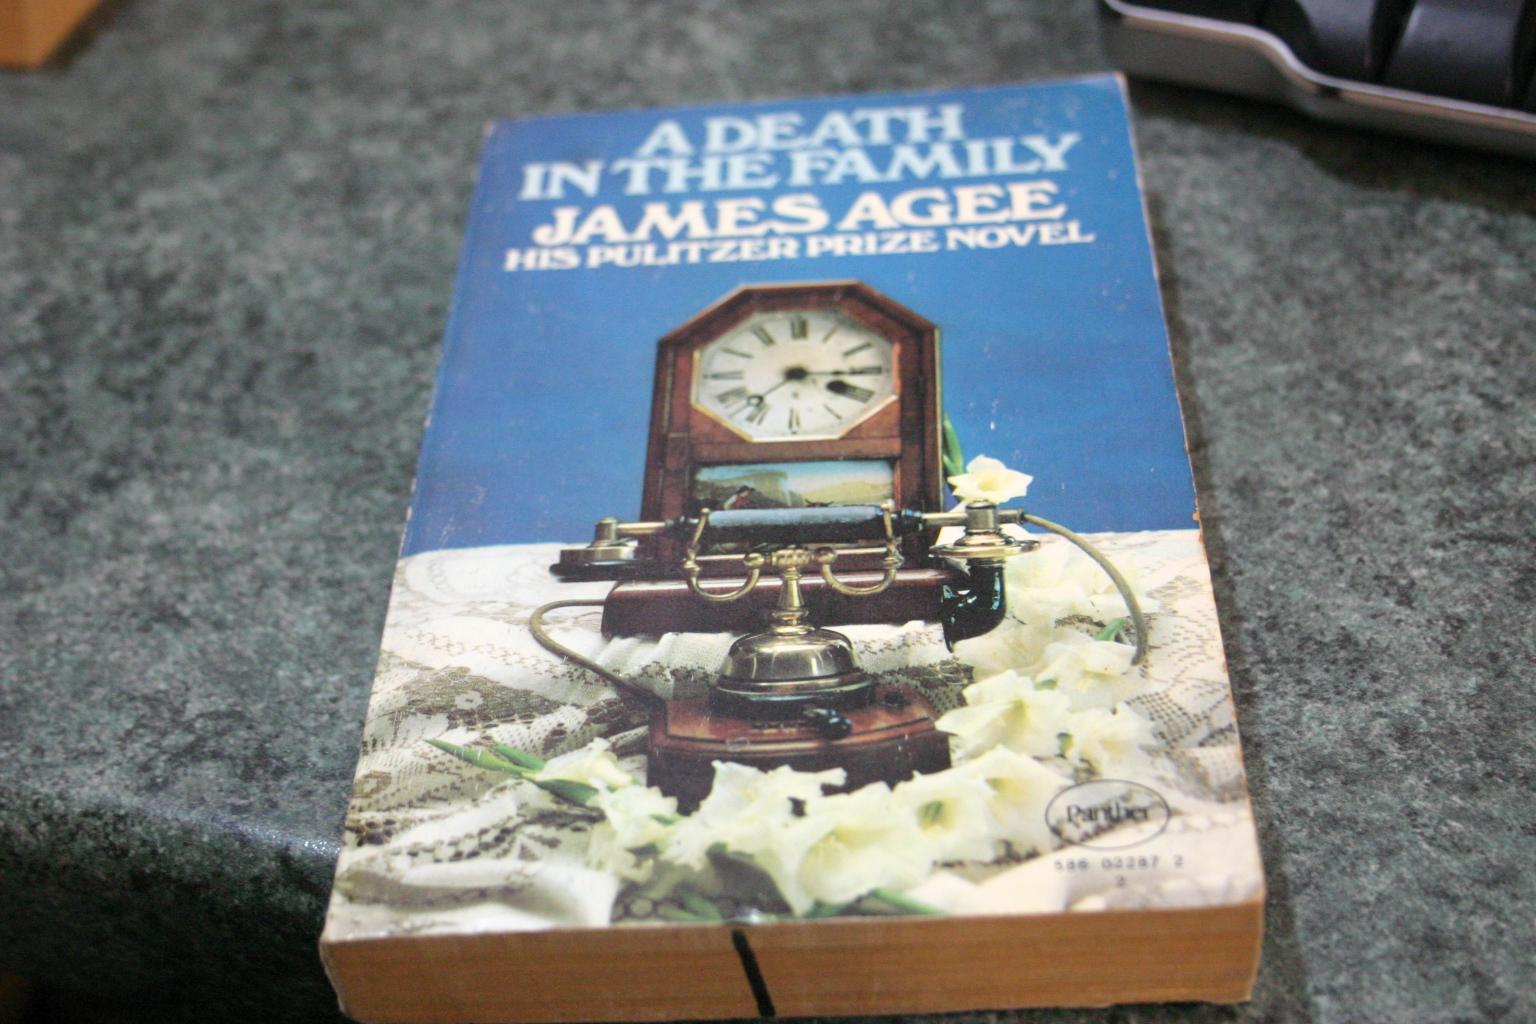 Death in the Family - James Agee